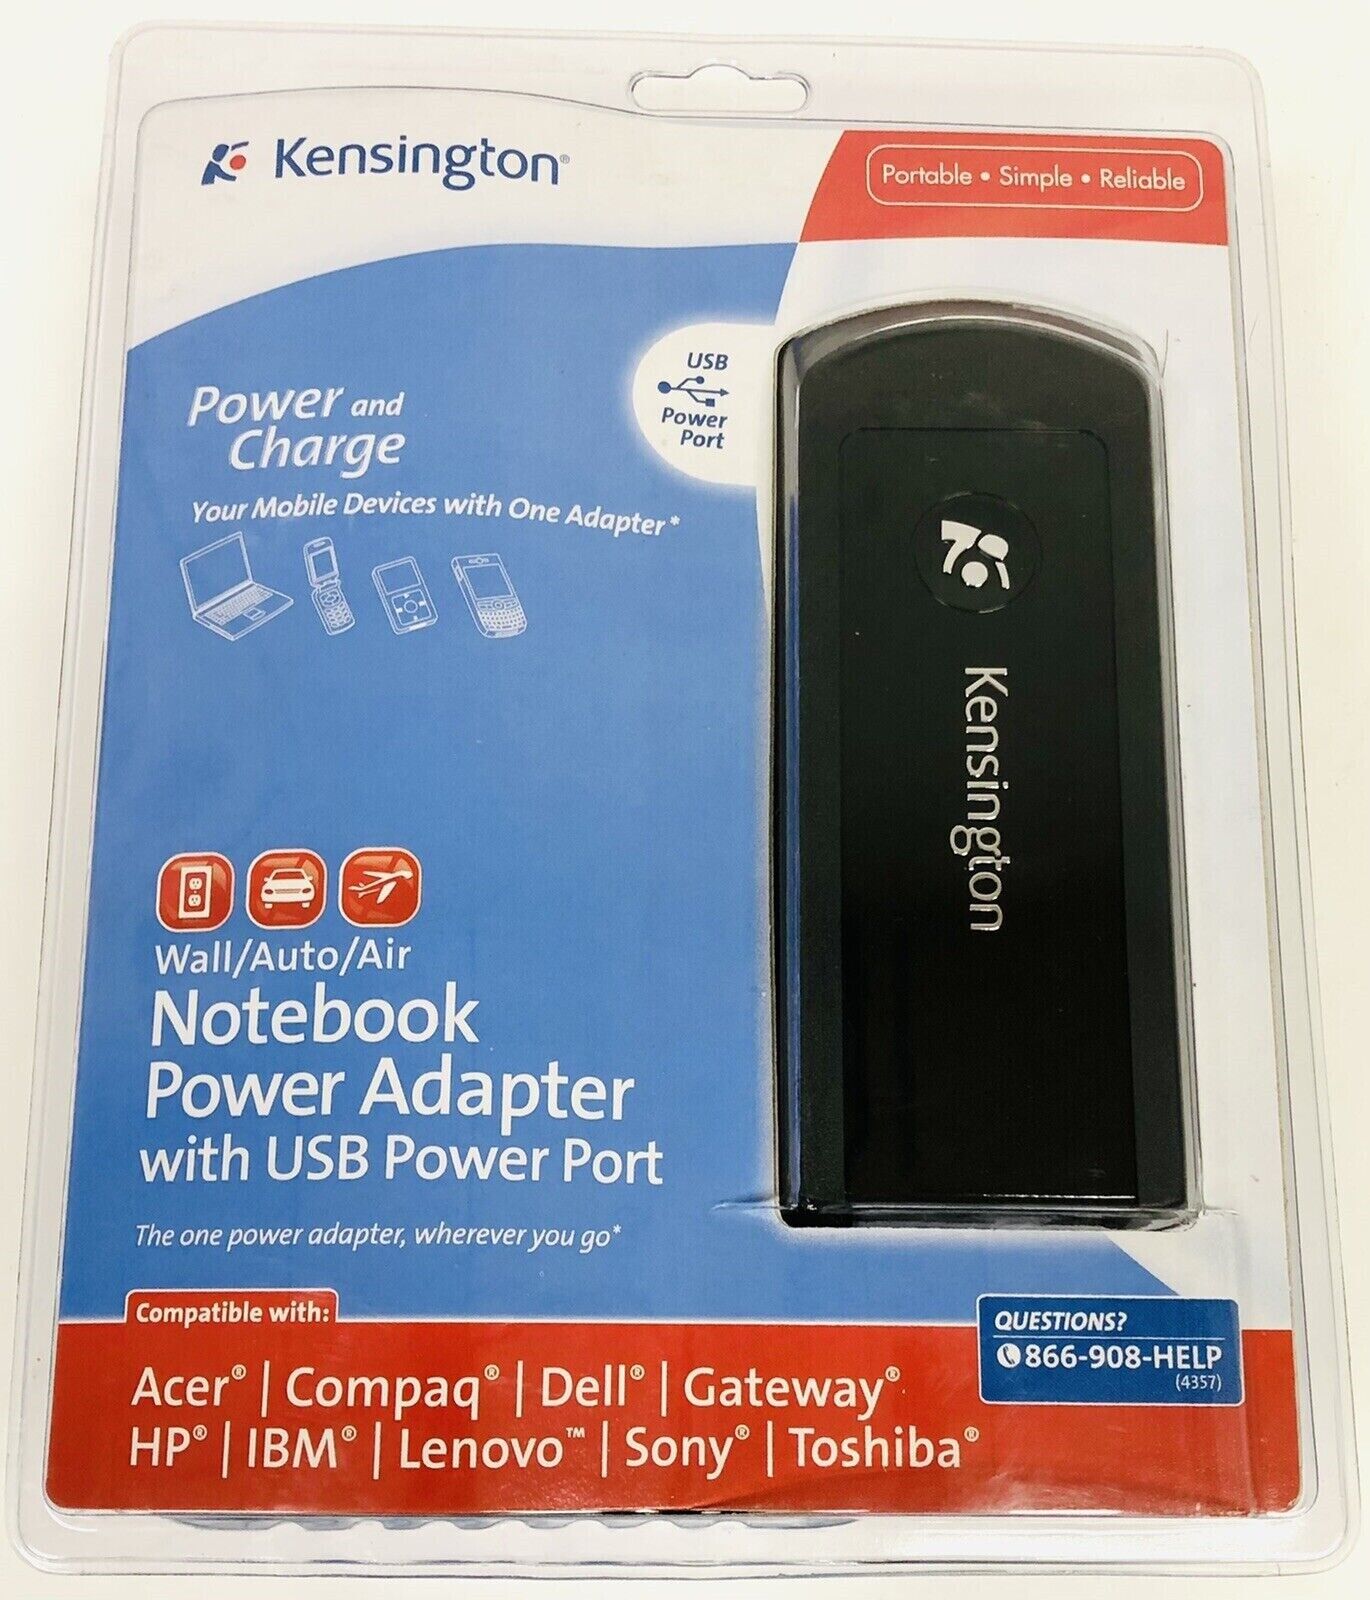 New Kensington Wall/Auto/Air Universal Notebook Power Adapter with USB Port